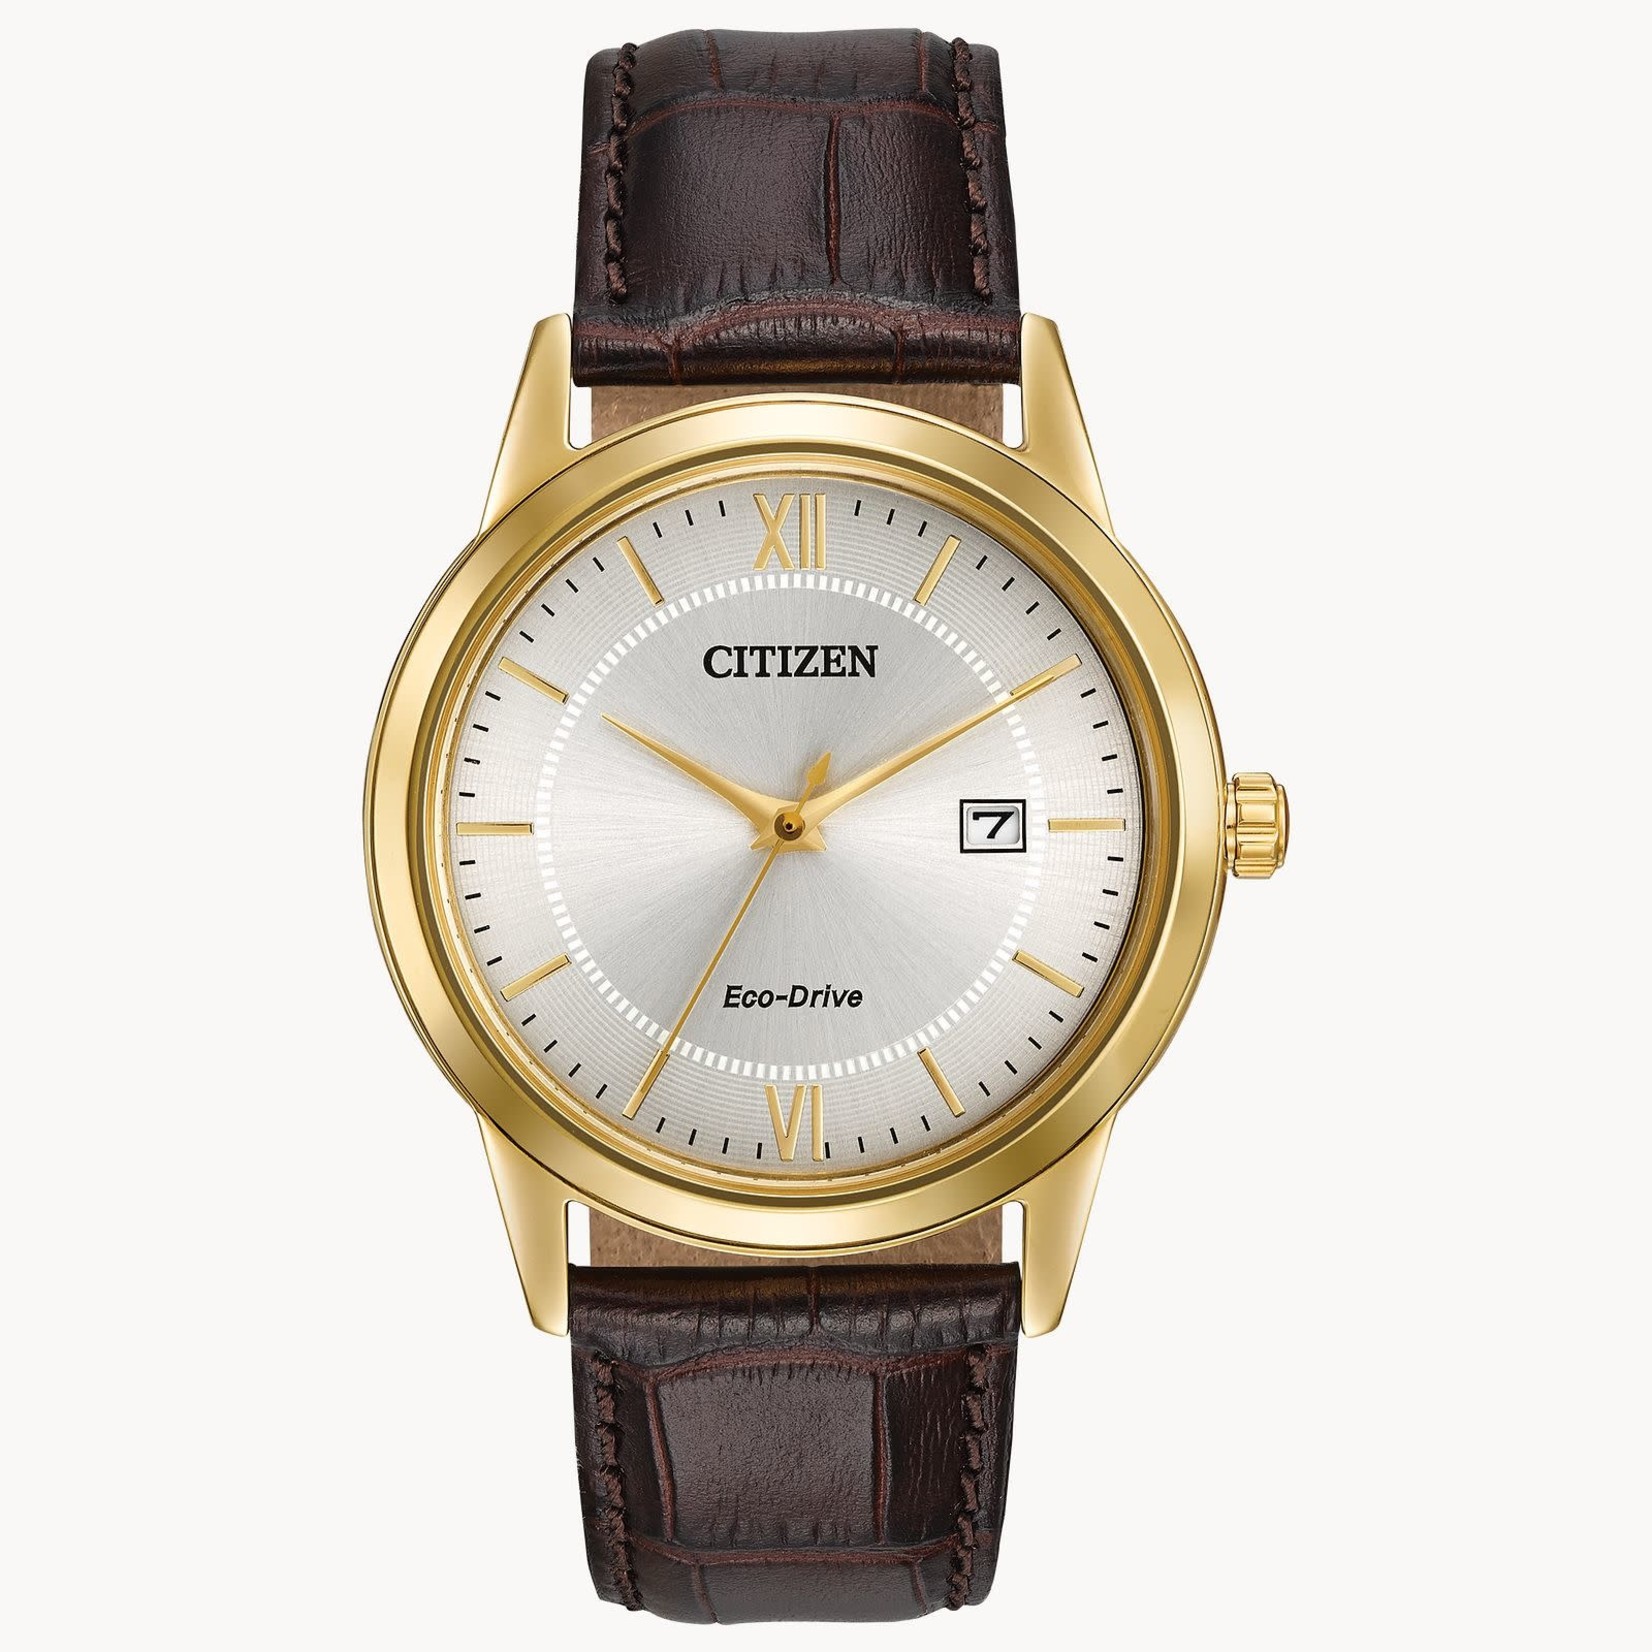 CITIZEN WATCH COMPANY Citizen Eco Drive Gold Tone Corso Watch with Leather Strap